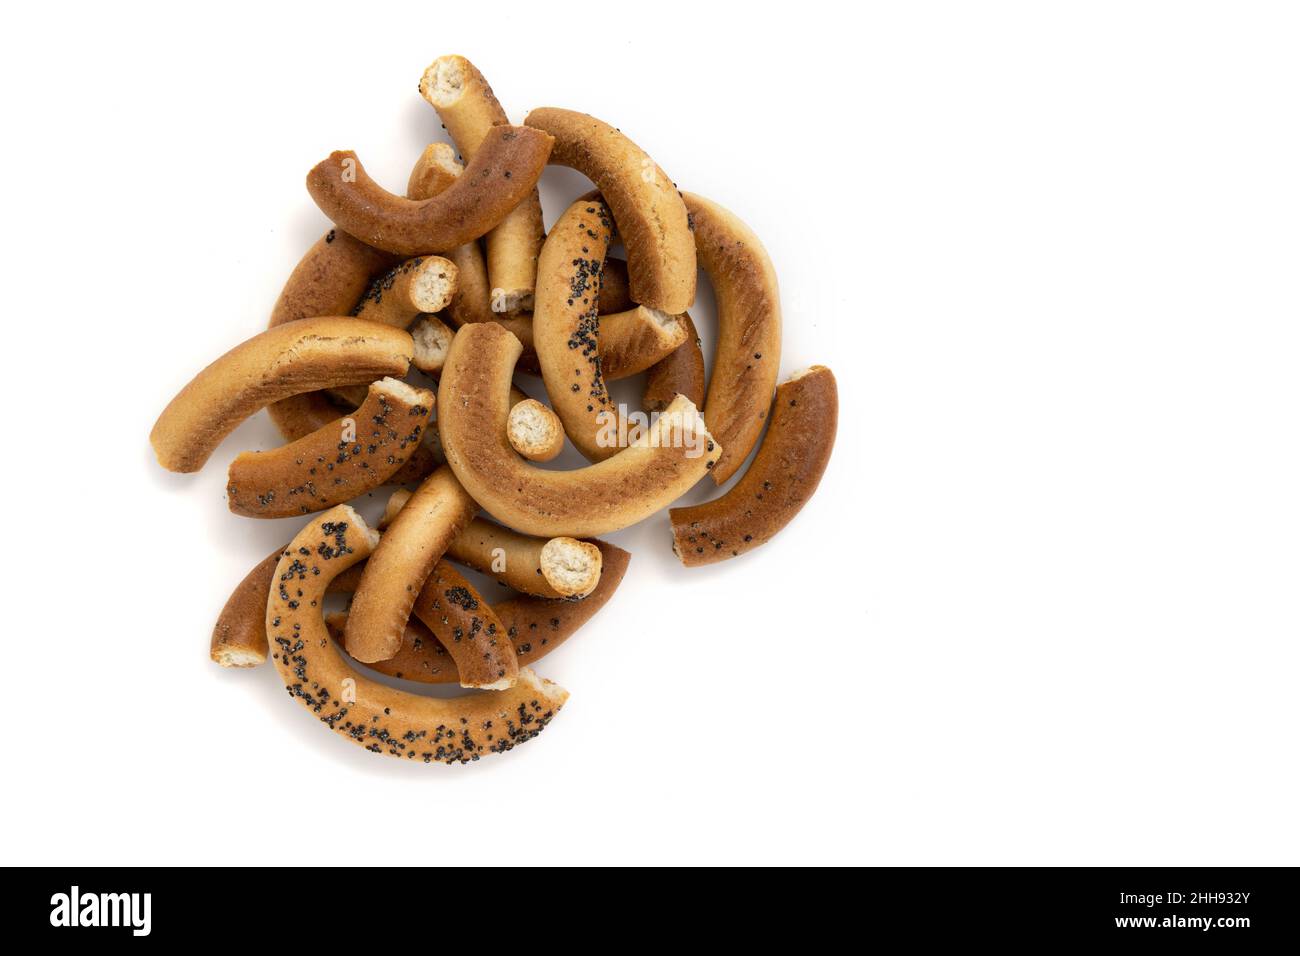 bagel with poppy seeds isolated on white background, pieces of bagels, top view, food bakery concept Stock Photo